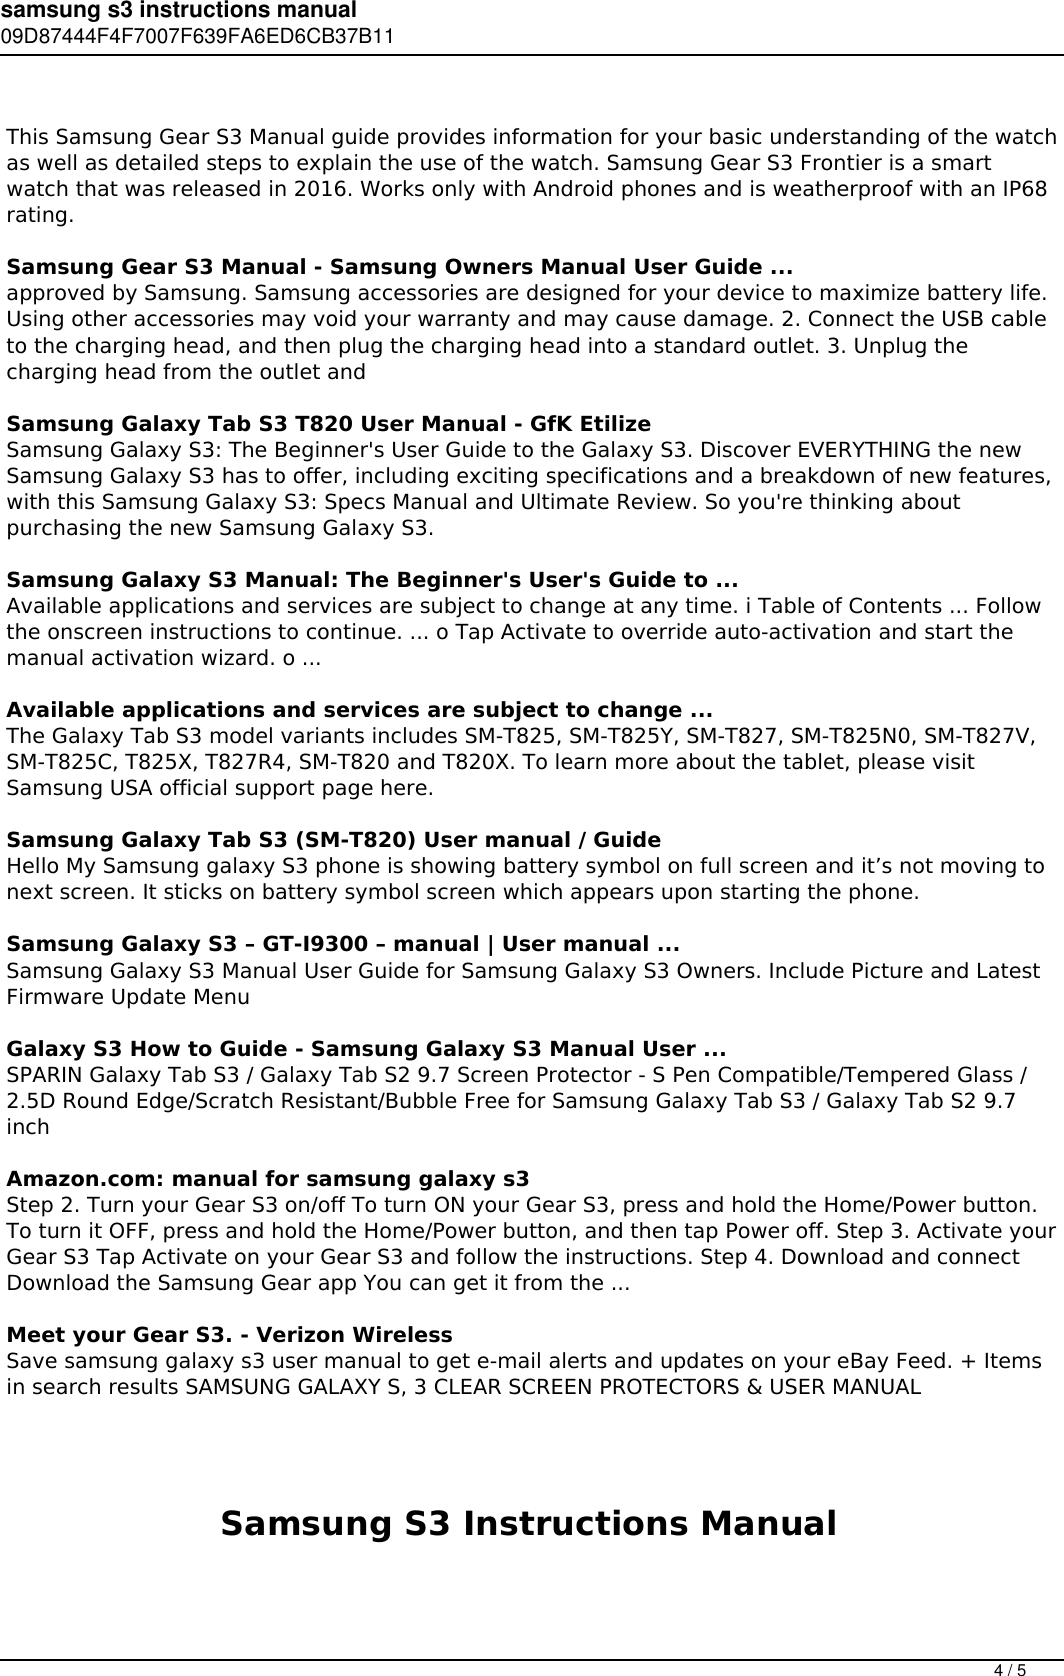 Page 4 of 5 - Samsung S3 Instructions Manual